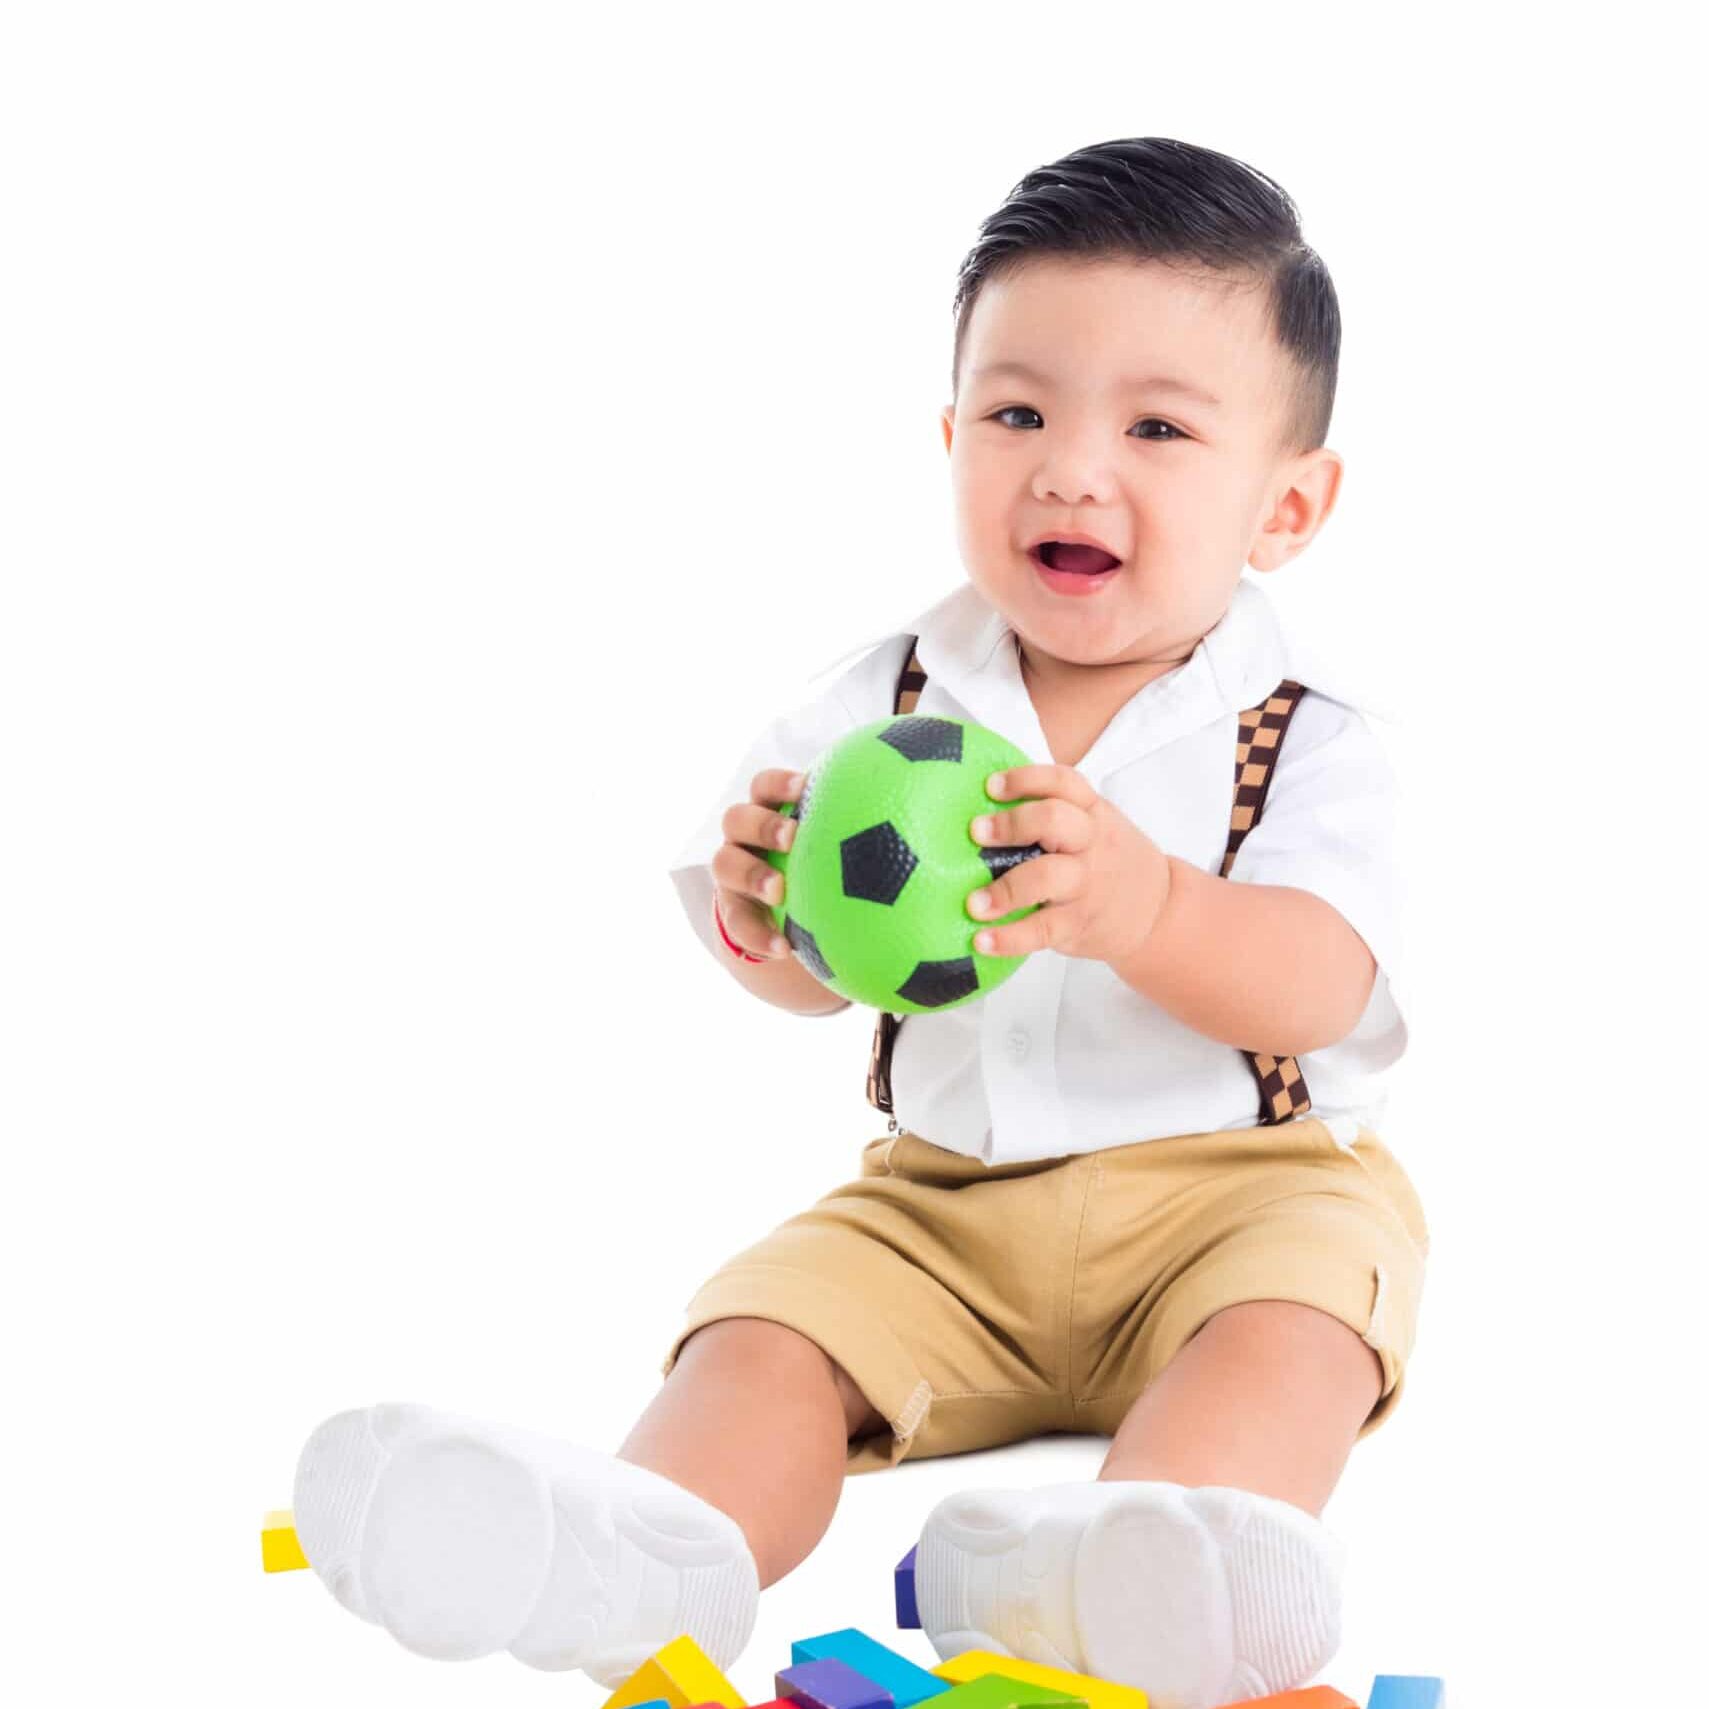 Little asian male toddler sitting on the floor and holding ball and smiles over white background